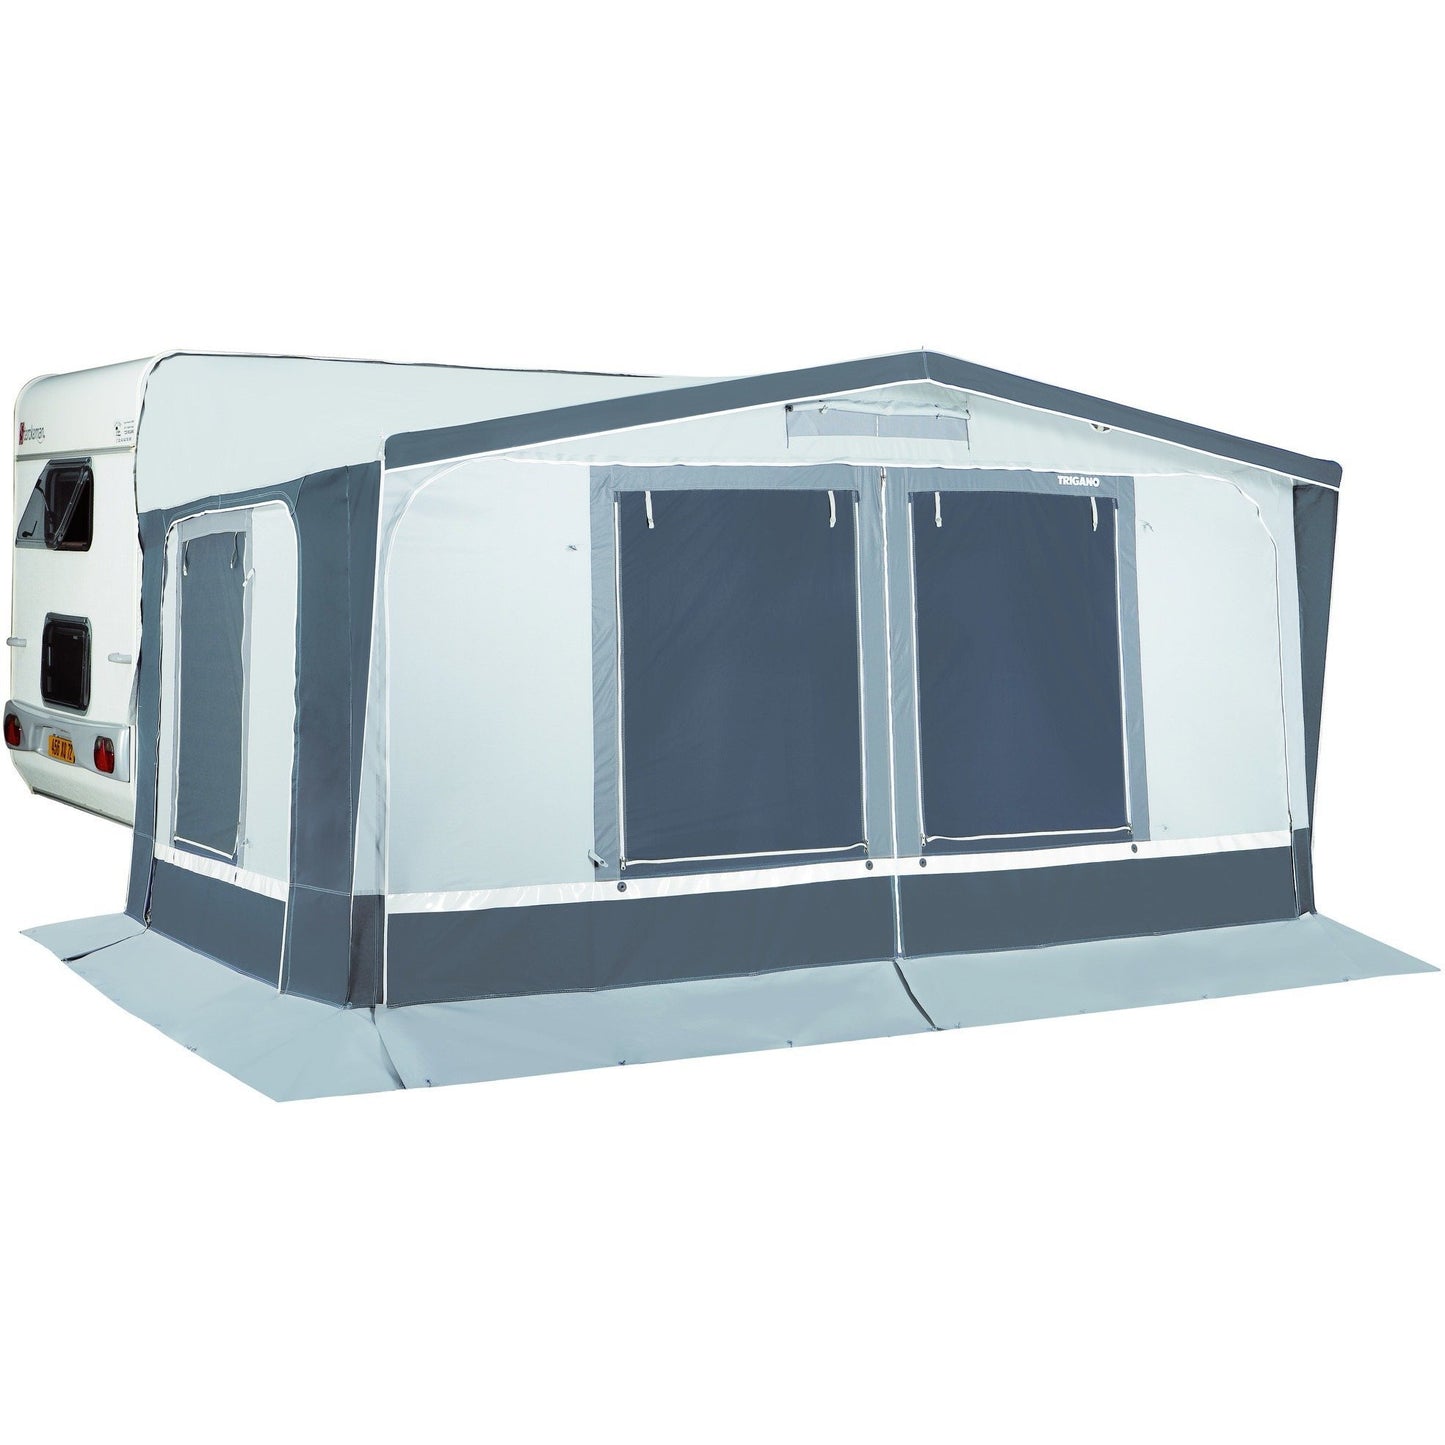 Blue Montreux 250 Caravan Awning By Trigano